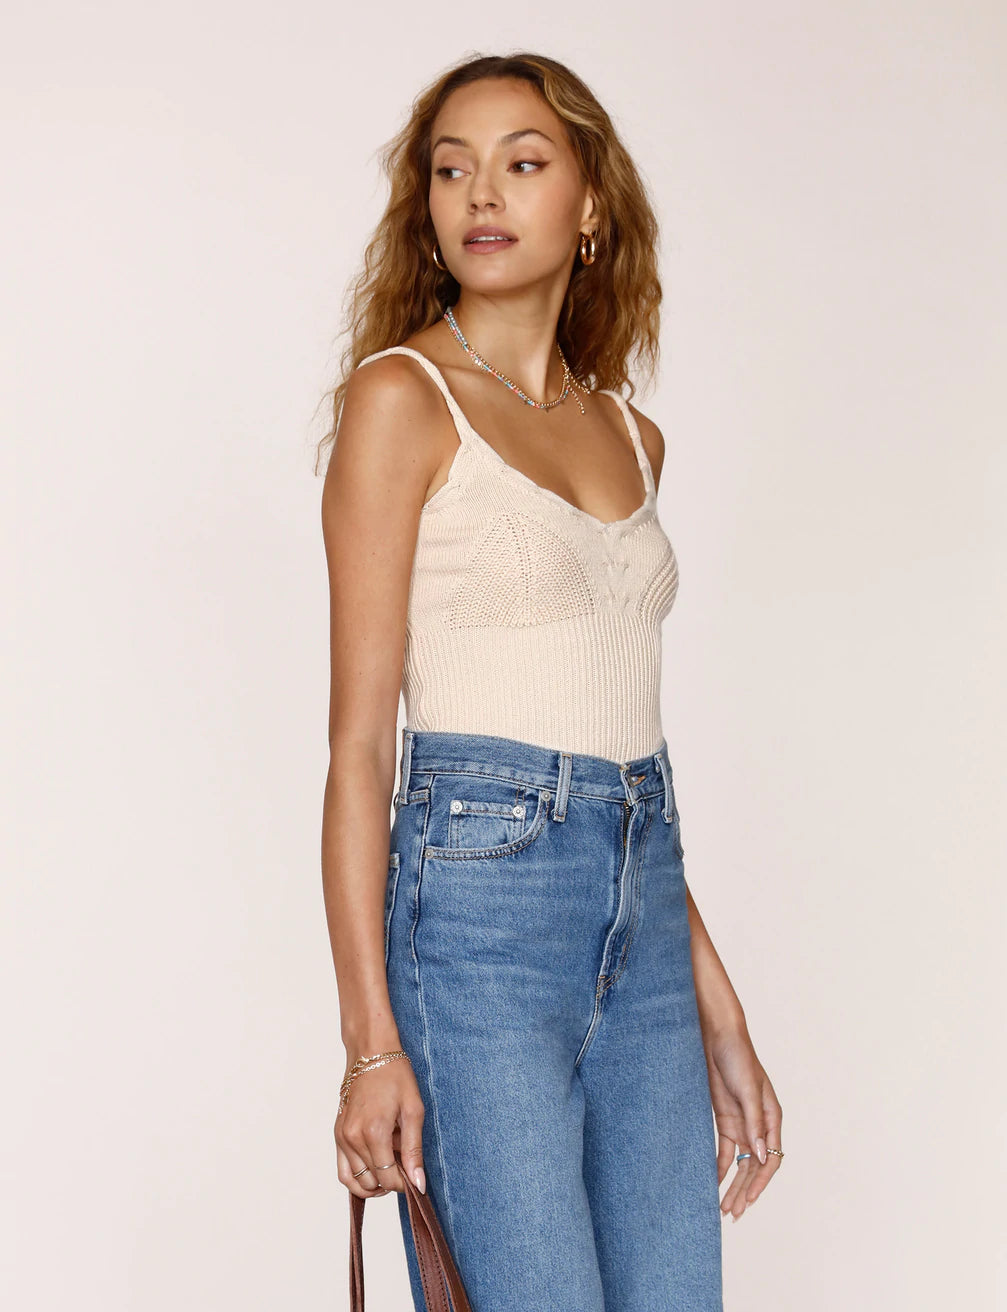 The JEANEE Cami